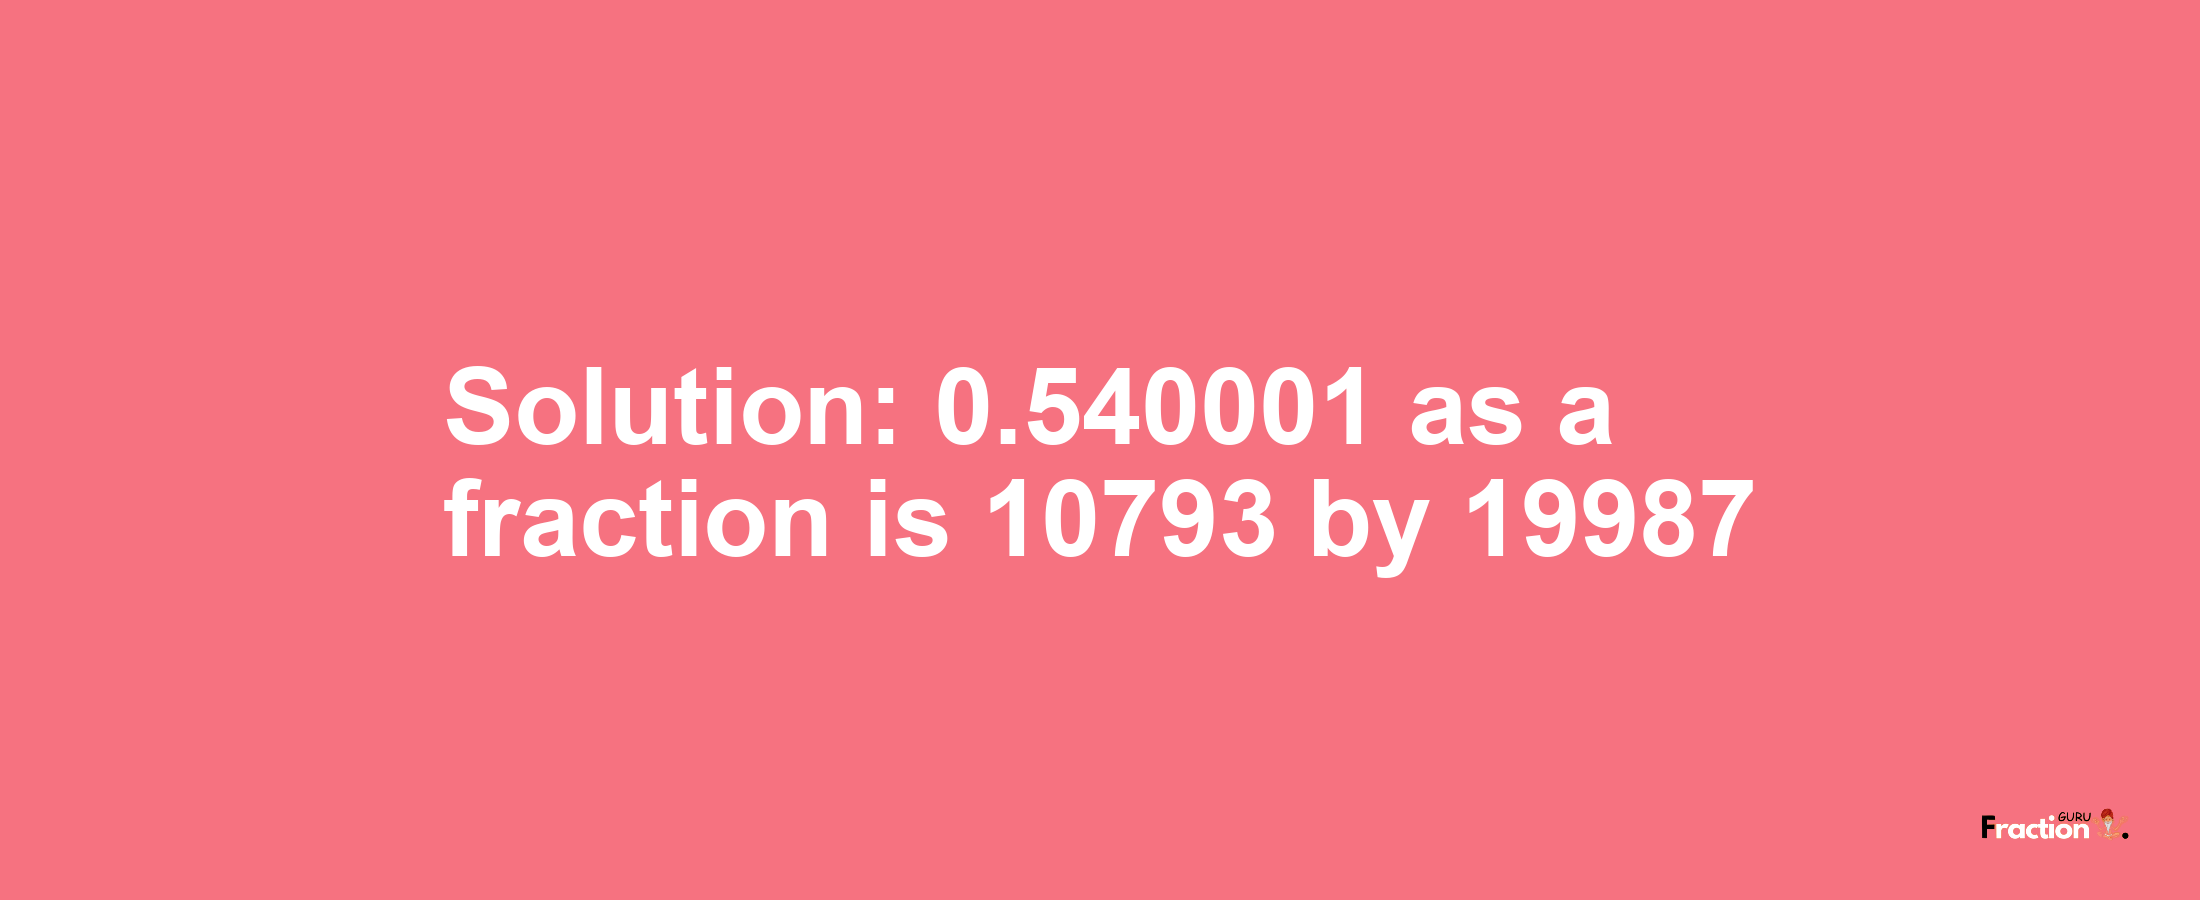 Solution:0.540001 as a fraction is 10793/19987